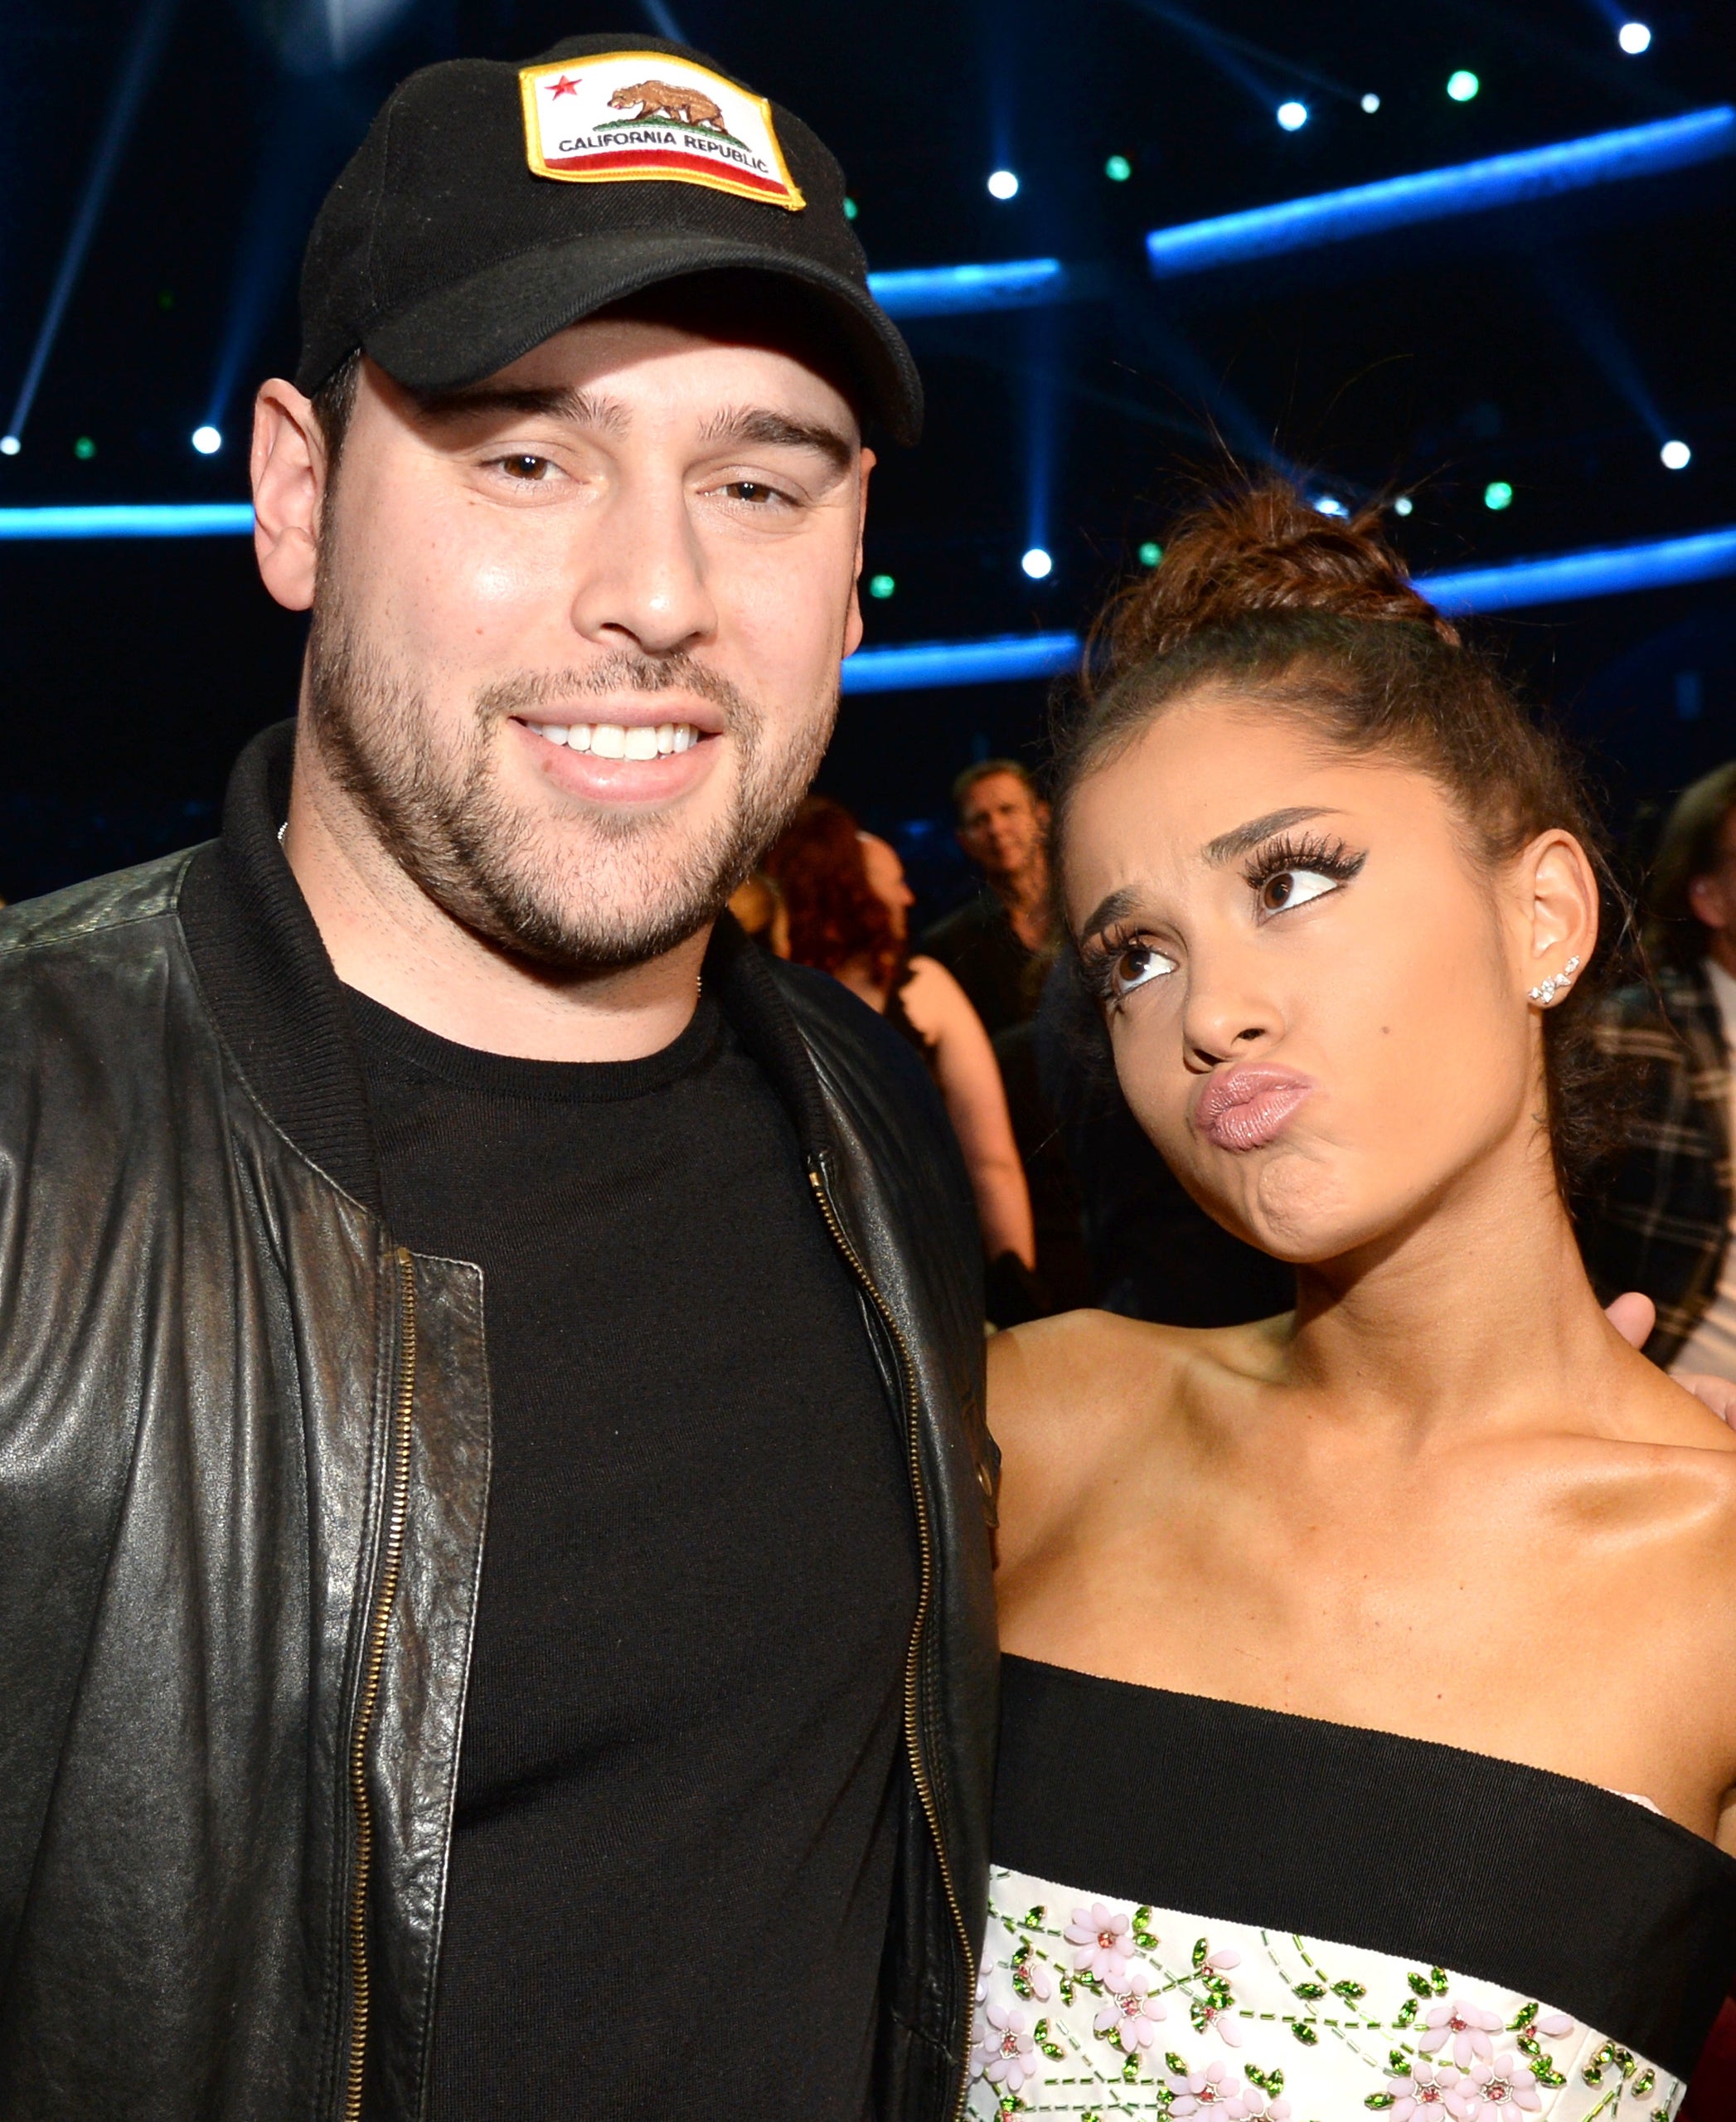 A closeup of Scooter Braun and Ariana Grande who&#x27;s making a silly pouting face